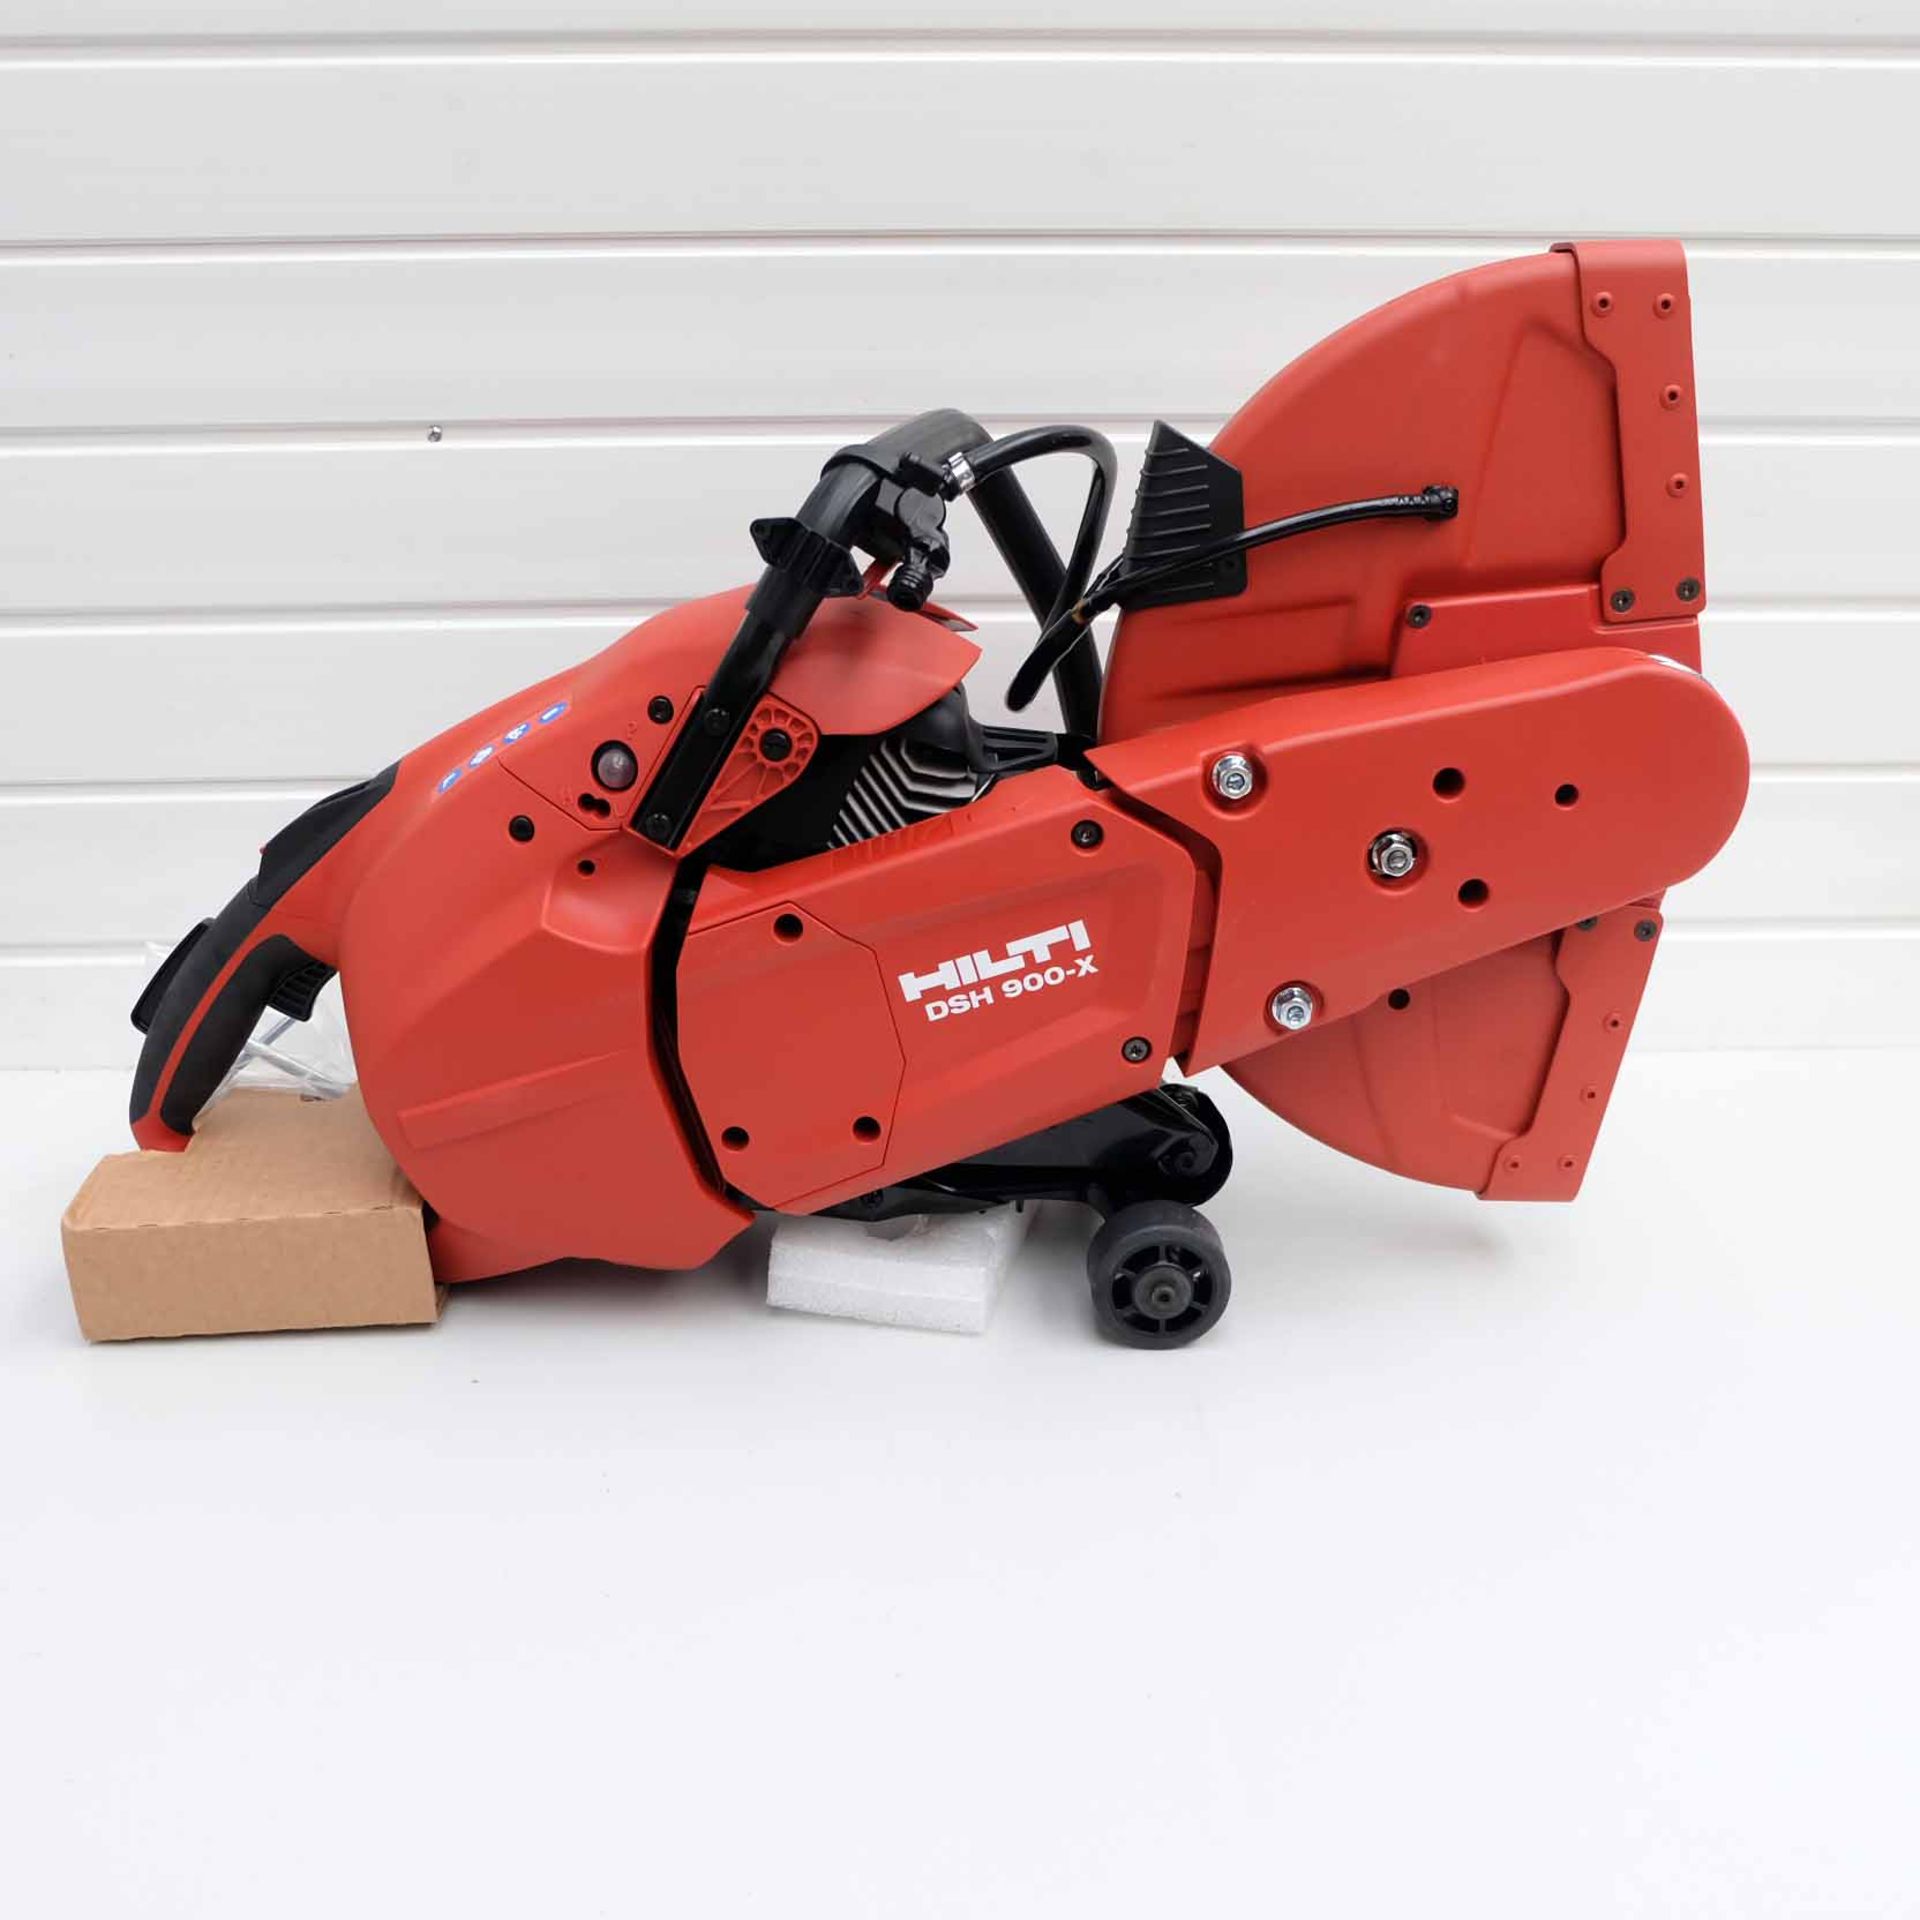 Hilti Hand Held Gas Saw. Model DSH 900-X 16". Complete With SP-16"x1" Blade. Easy Start Auto-Choke S - Image 2 of 22